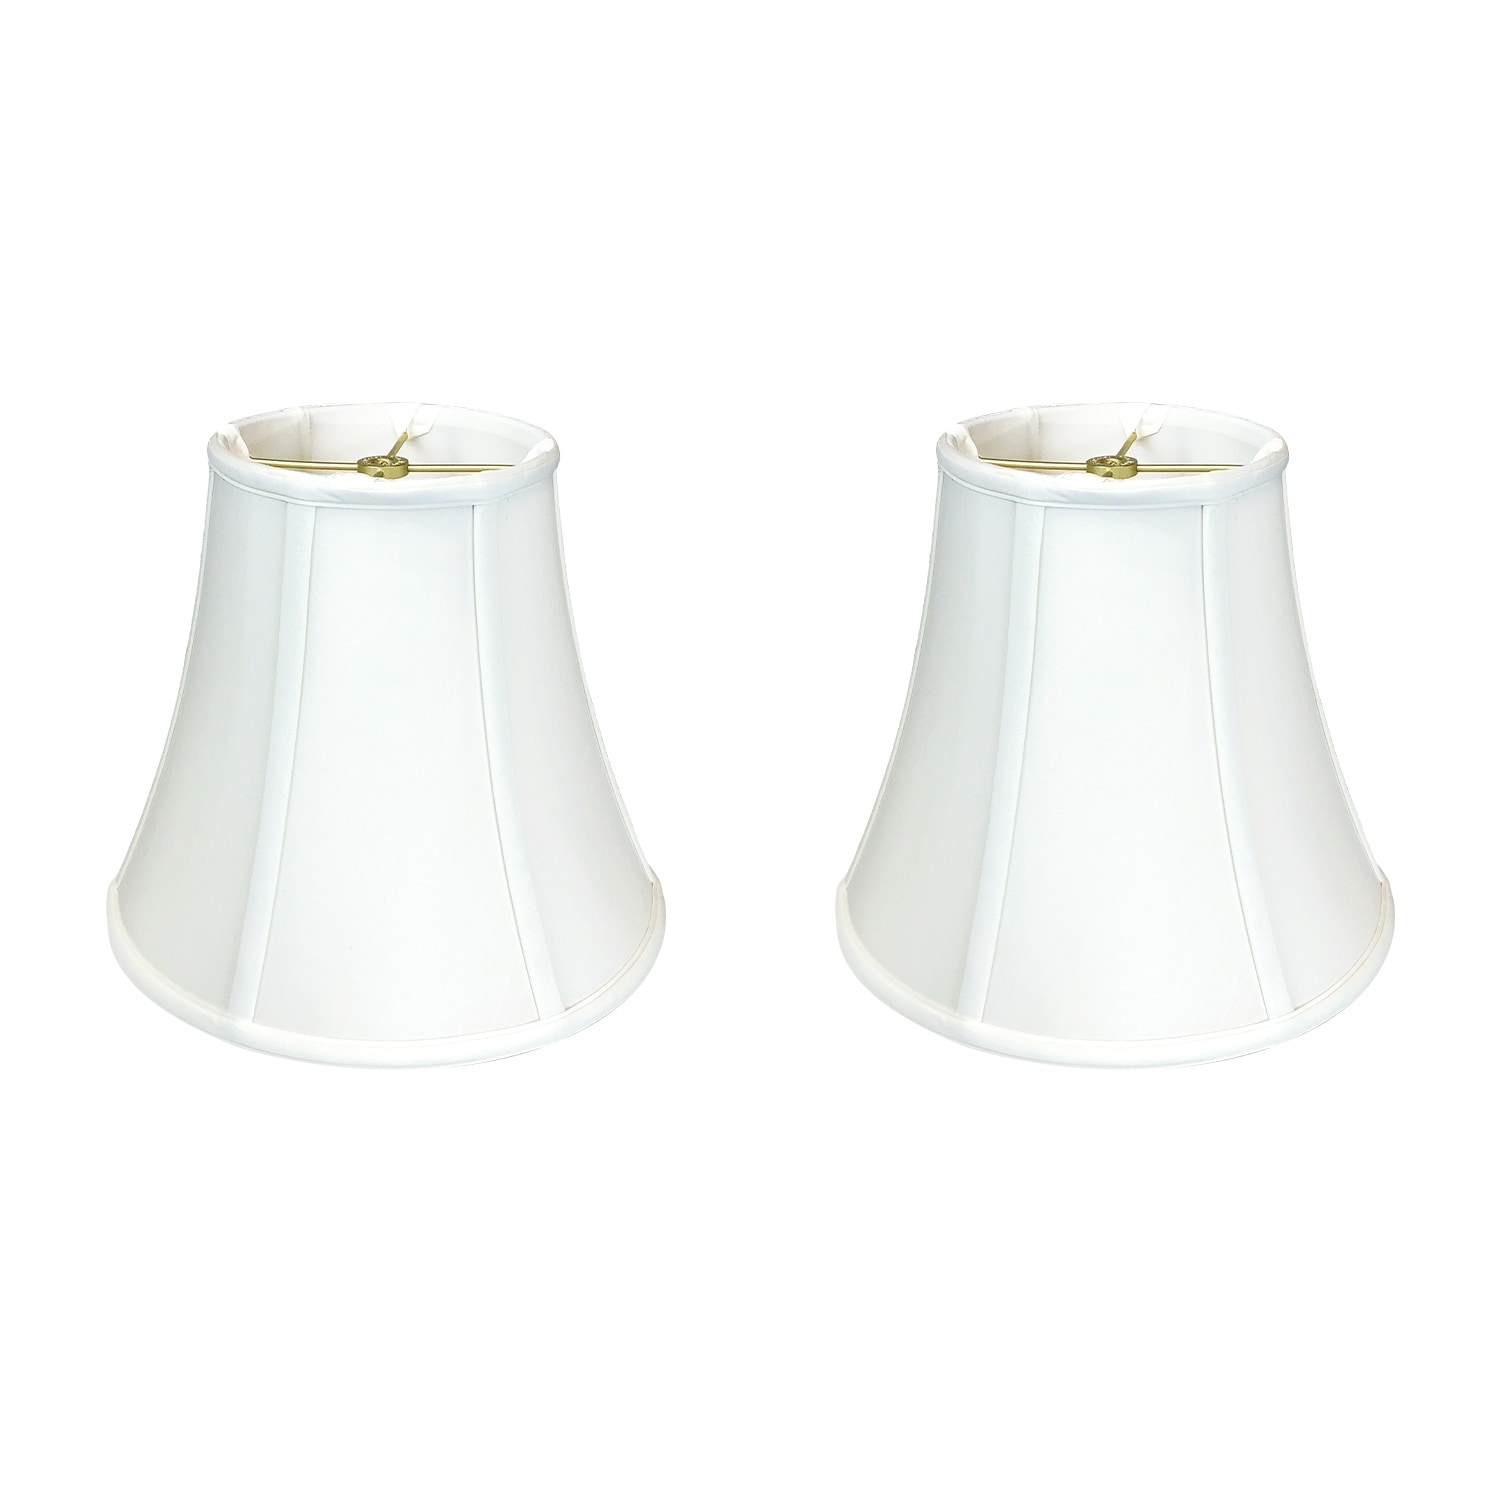 White 7 x 14 x 11.5 Royal Designs BSO-715-14WH Square Bell Basic Lamp Shade 